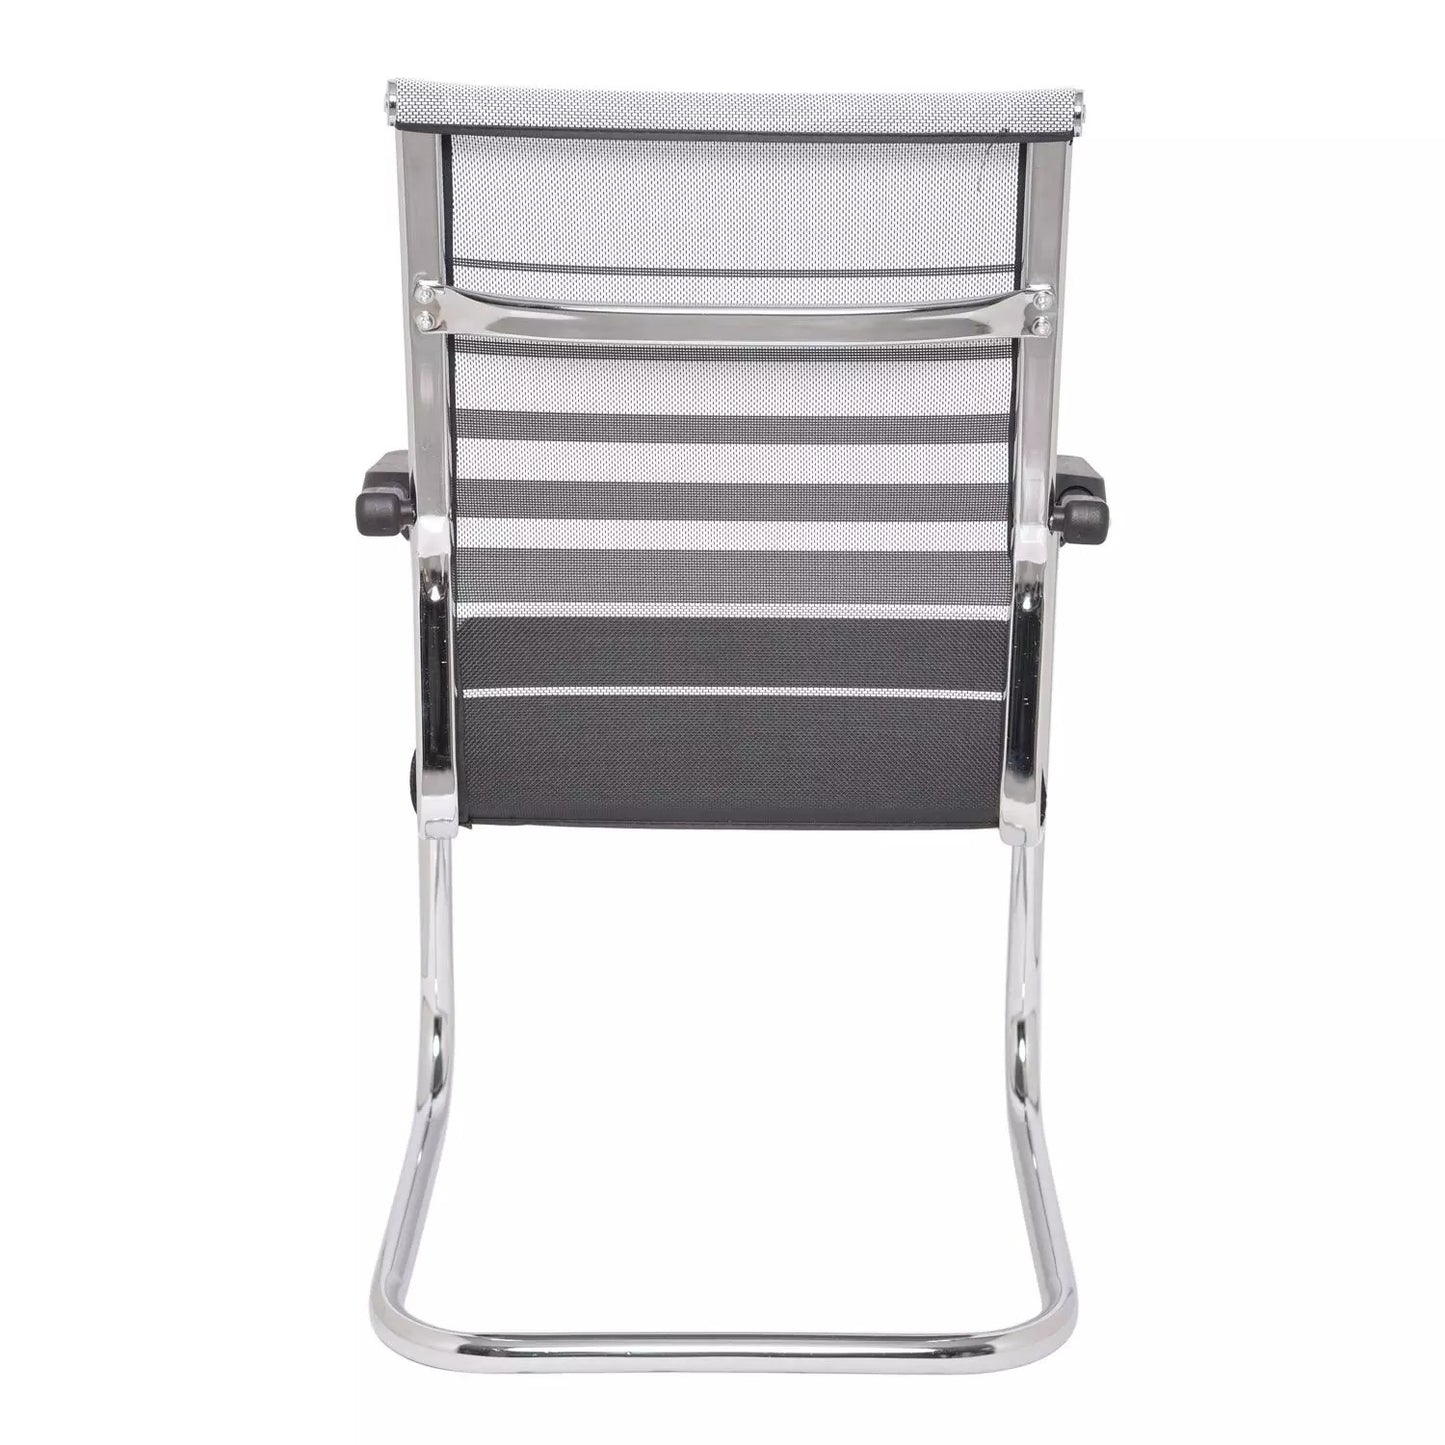 Bowzar Imorted Net Mesh Visitor Chair with Arms Chrome Finninsh Black and Grey Strip